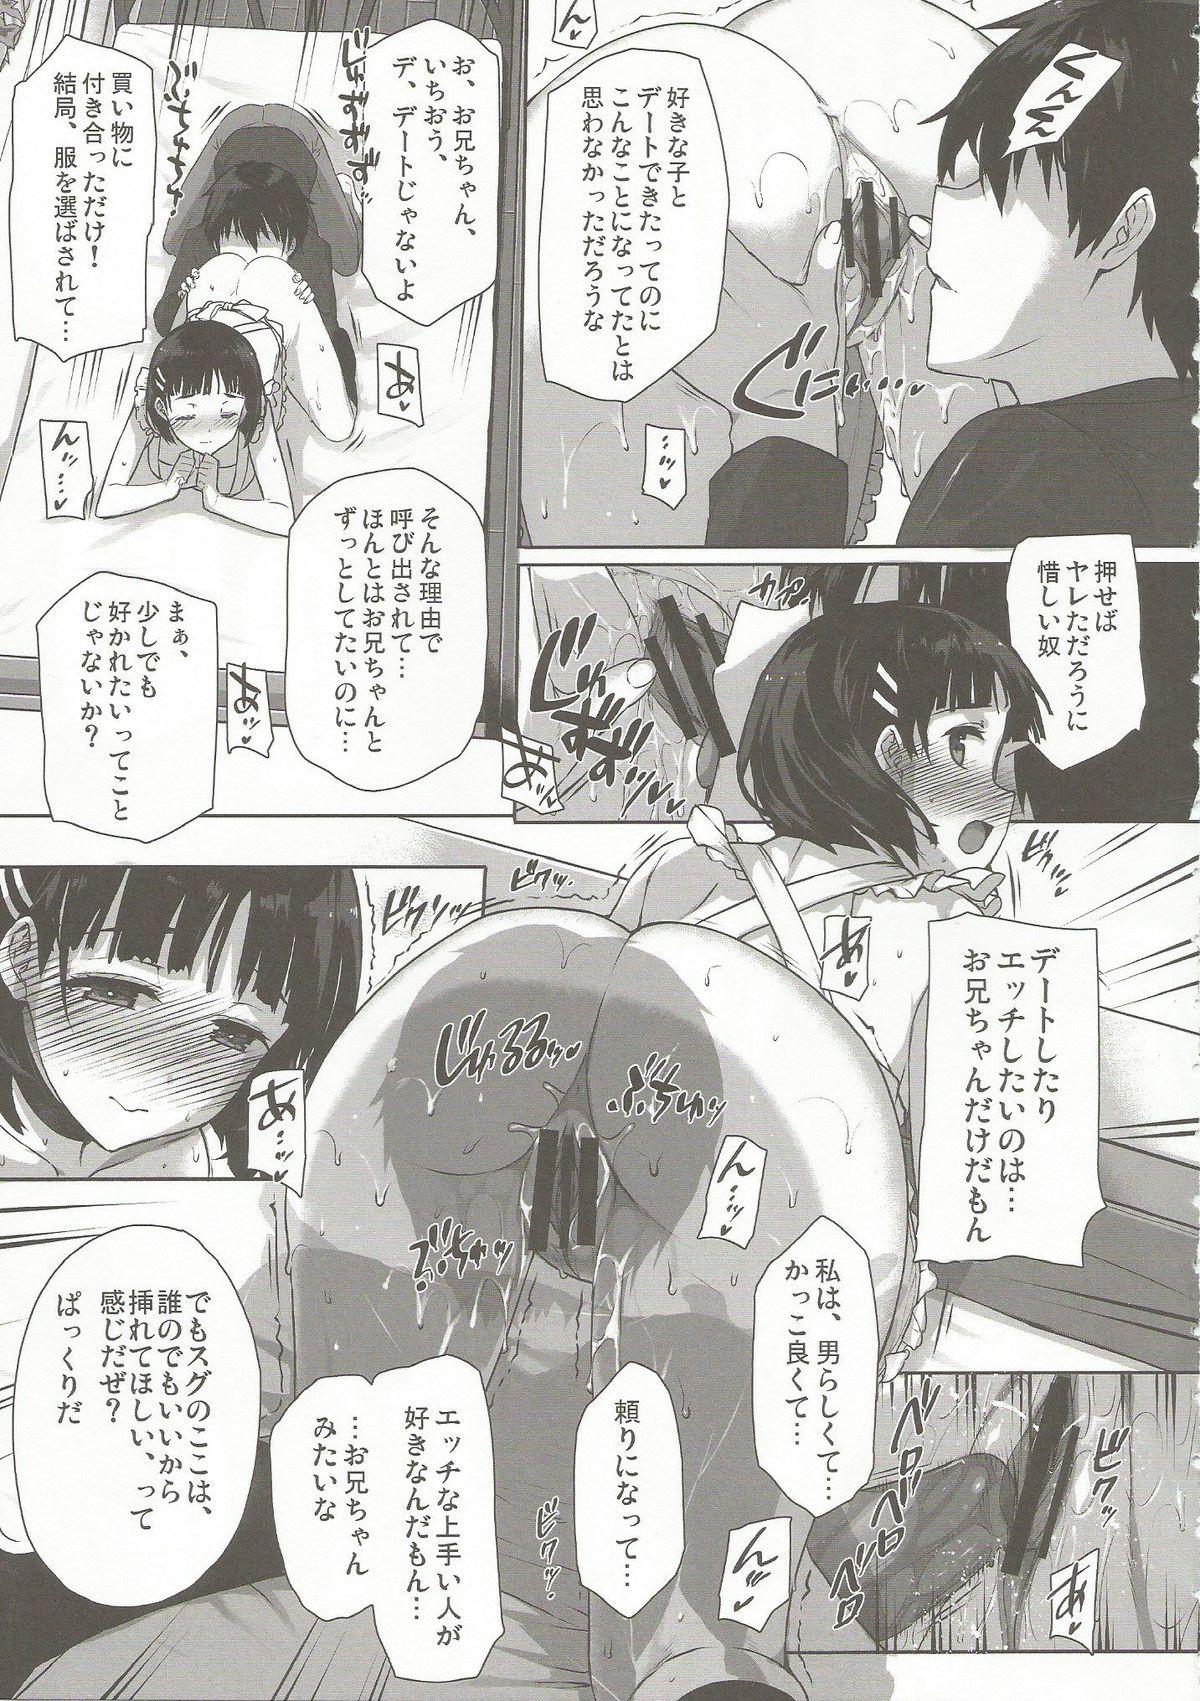 Abuse Inran SWORD ART SISTER x LOVER - Sword art online Whore - Page 6